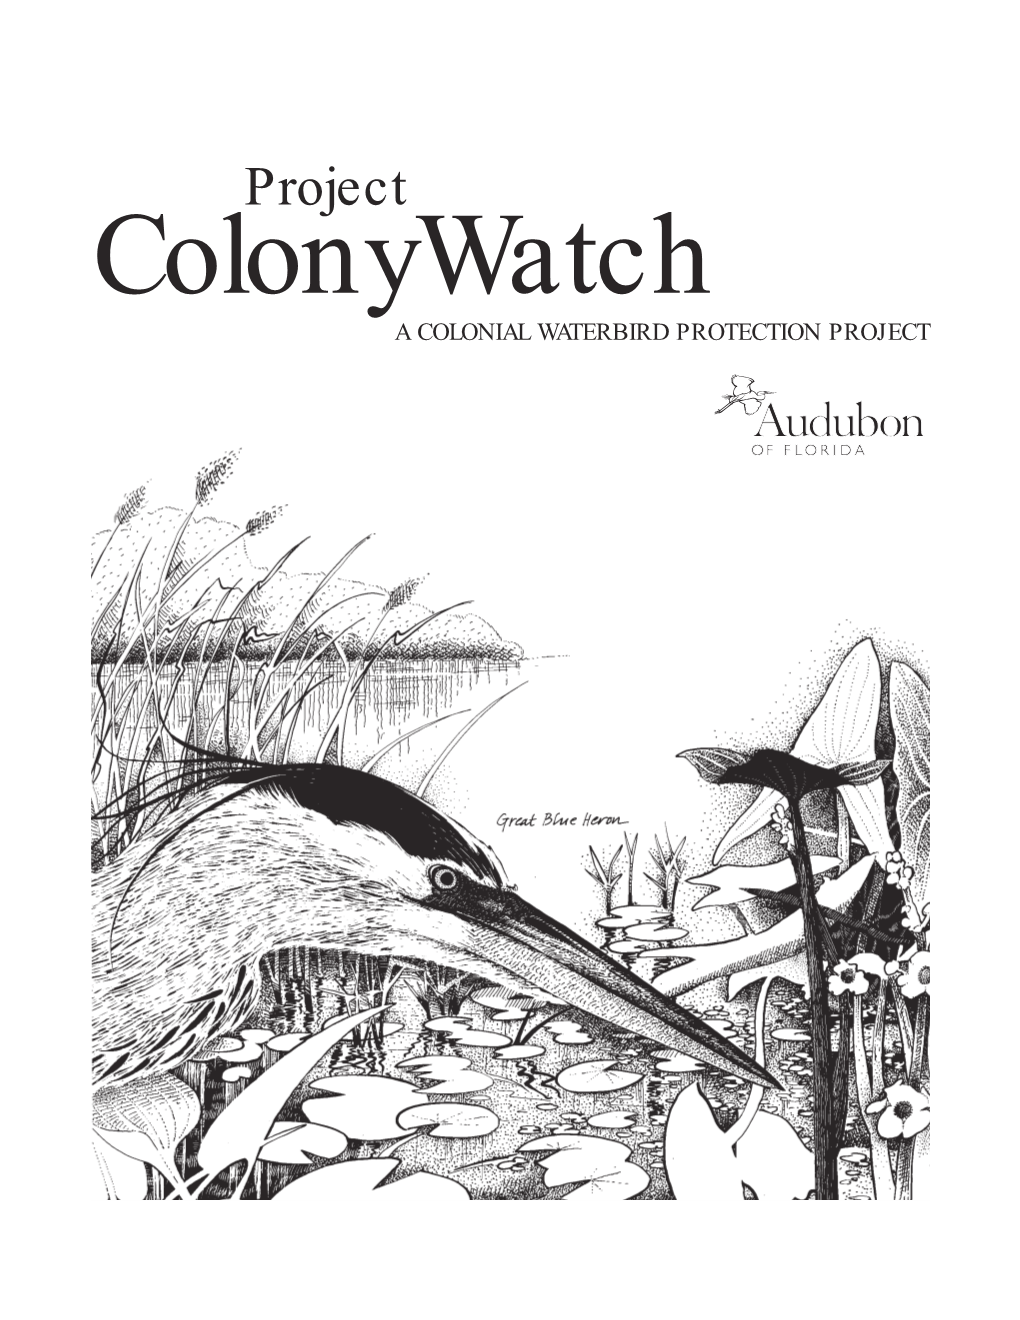 Project Colonywatch a COLONIAL WATERBIRD PROTECTION PROJECT Project Colonywatch Handbook Written by Richard T